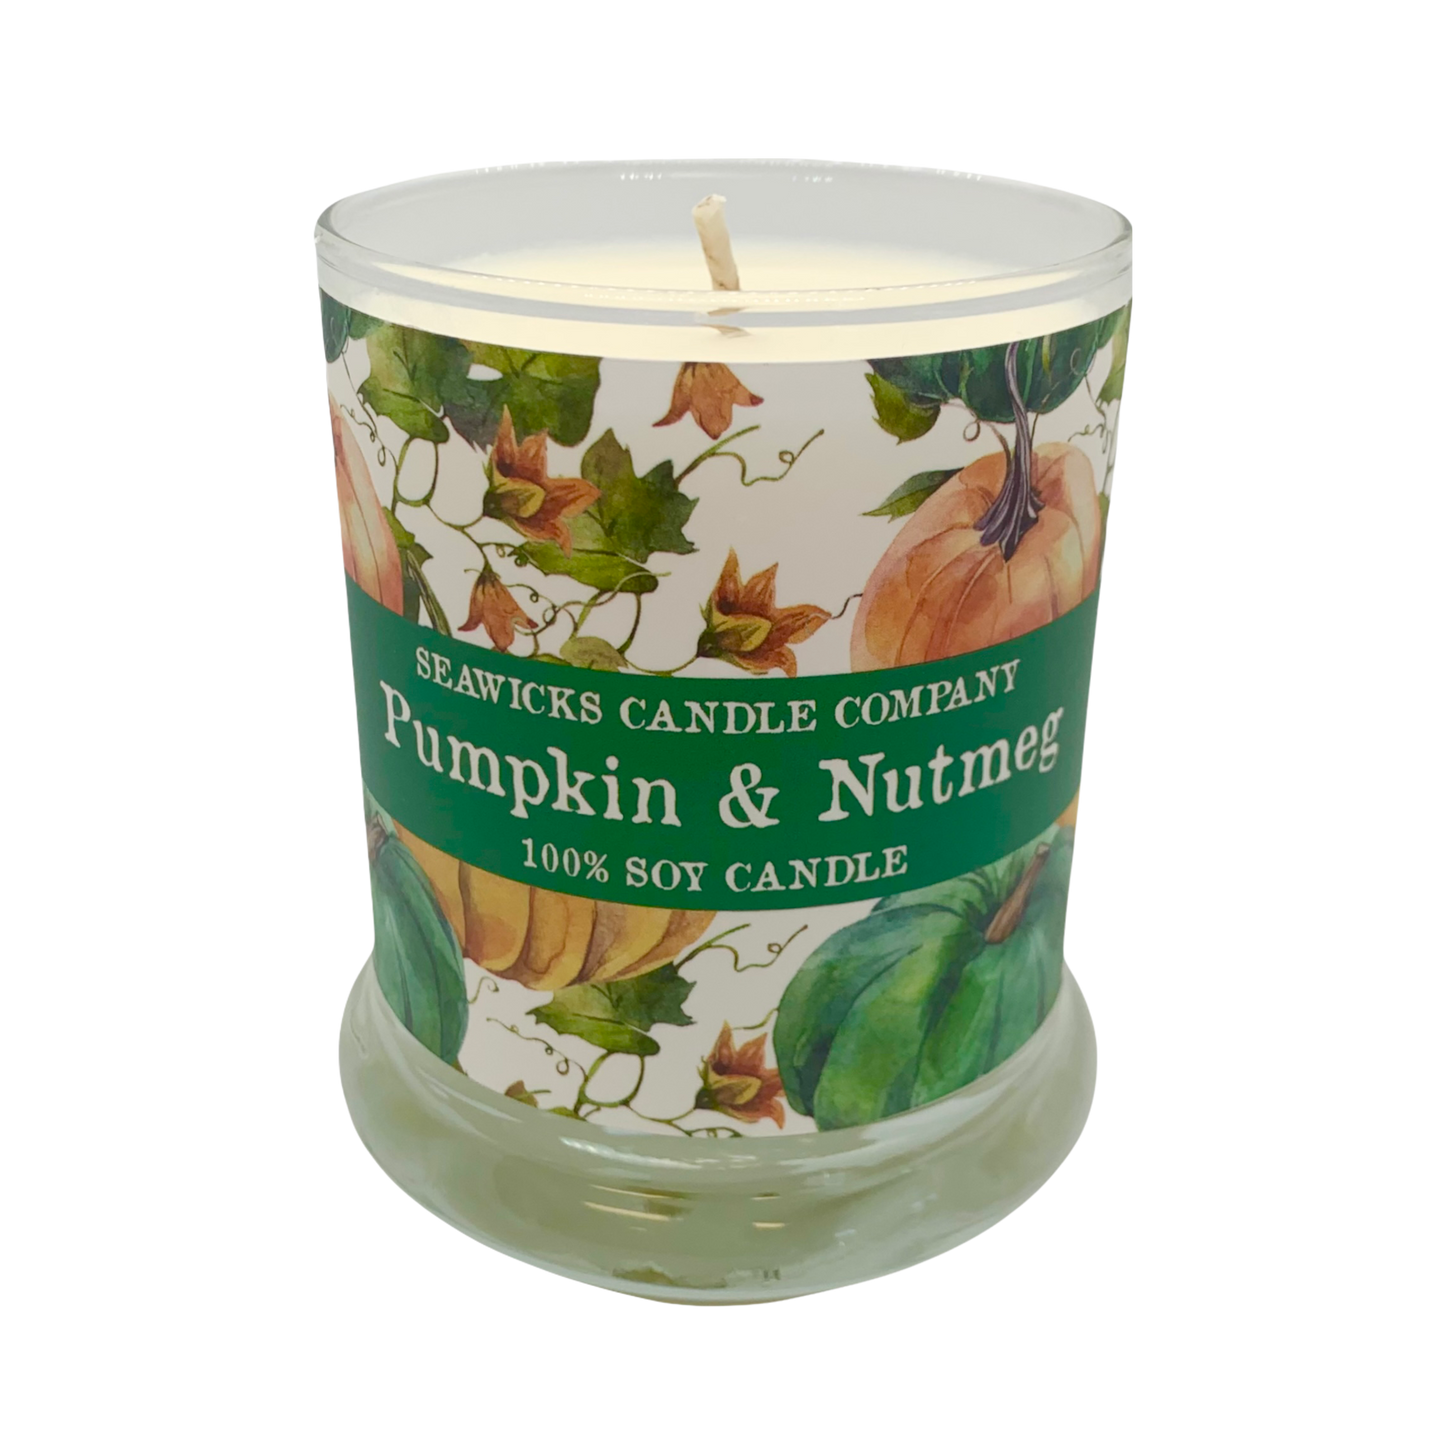 Pumpkin and Nutmeg Candle